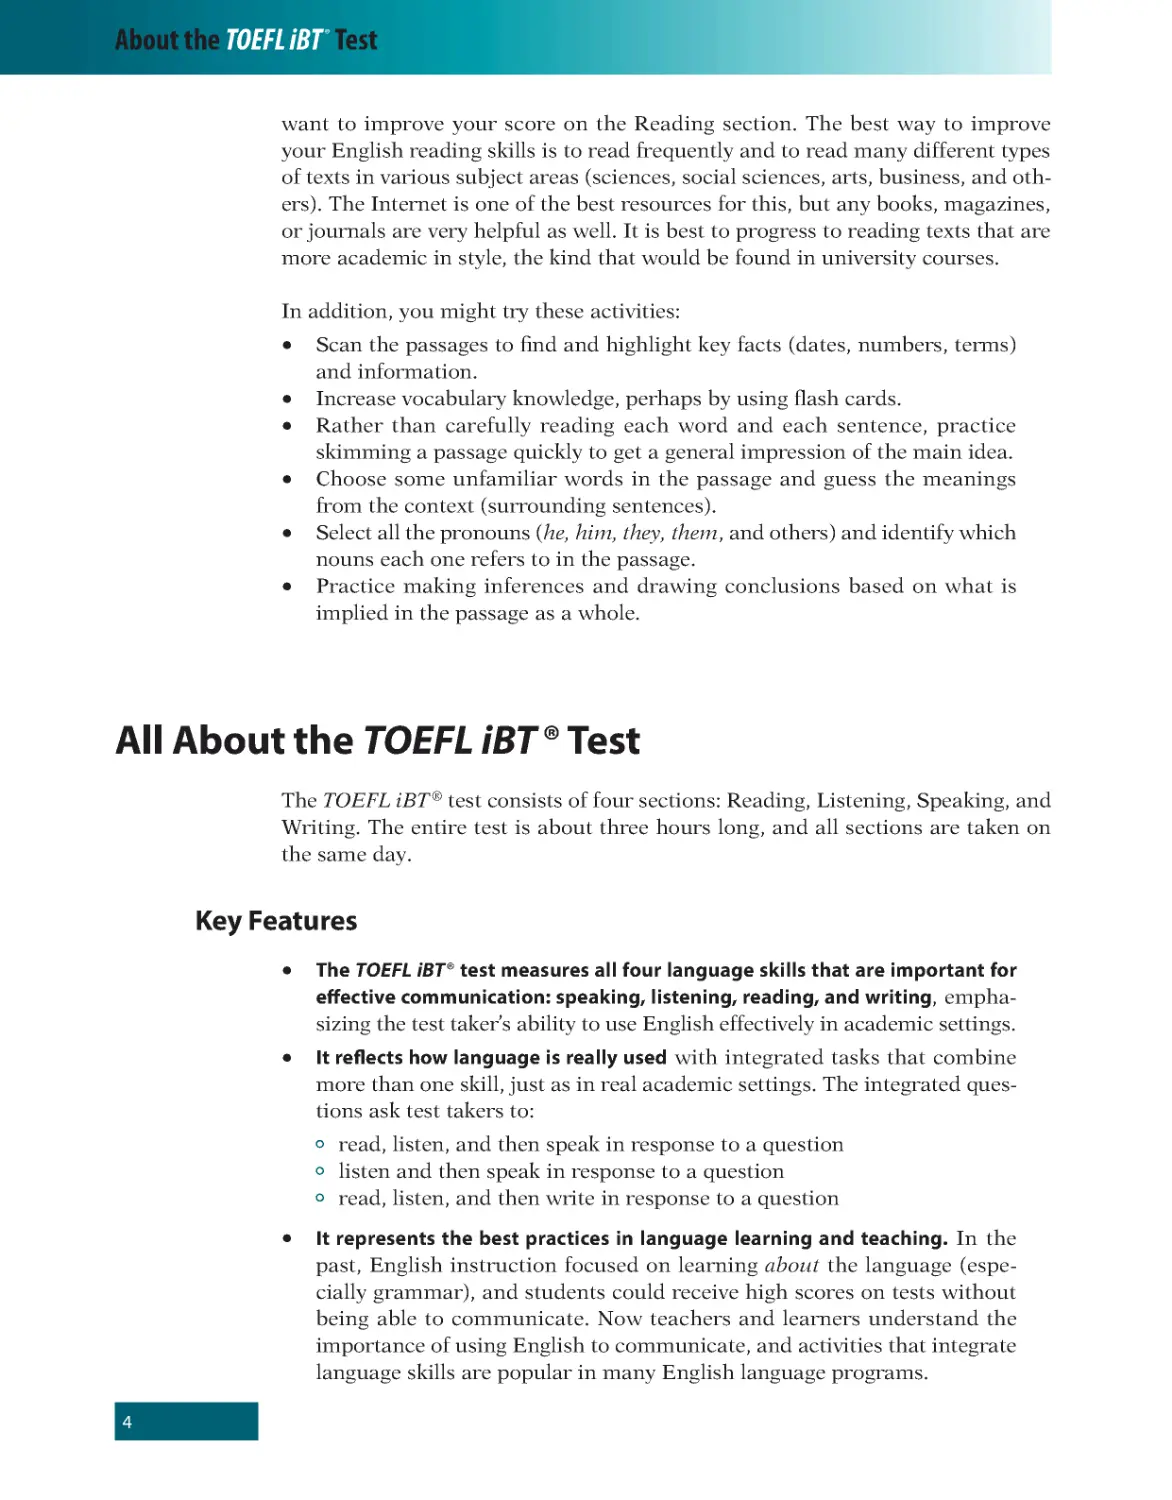 All About the TOEFL iBT® Test